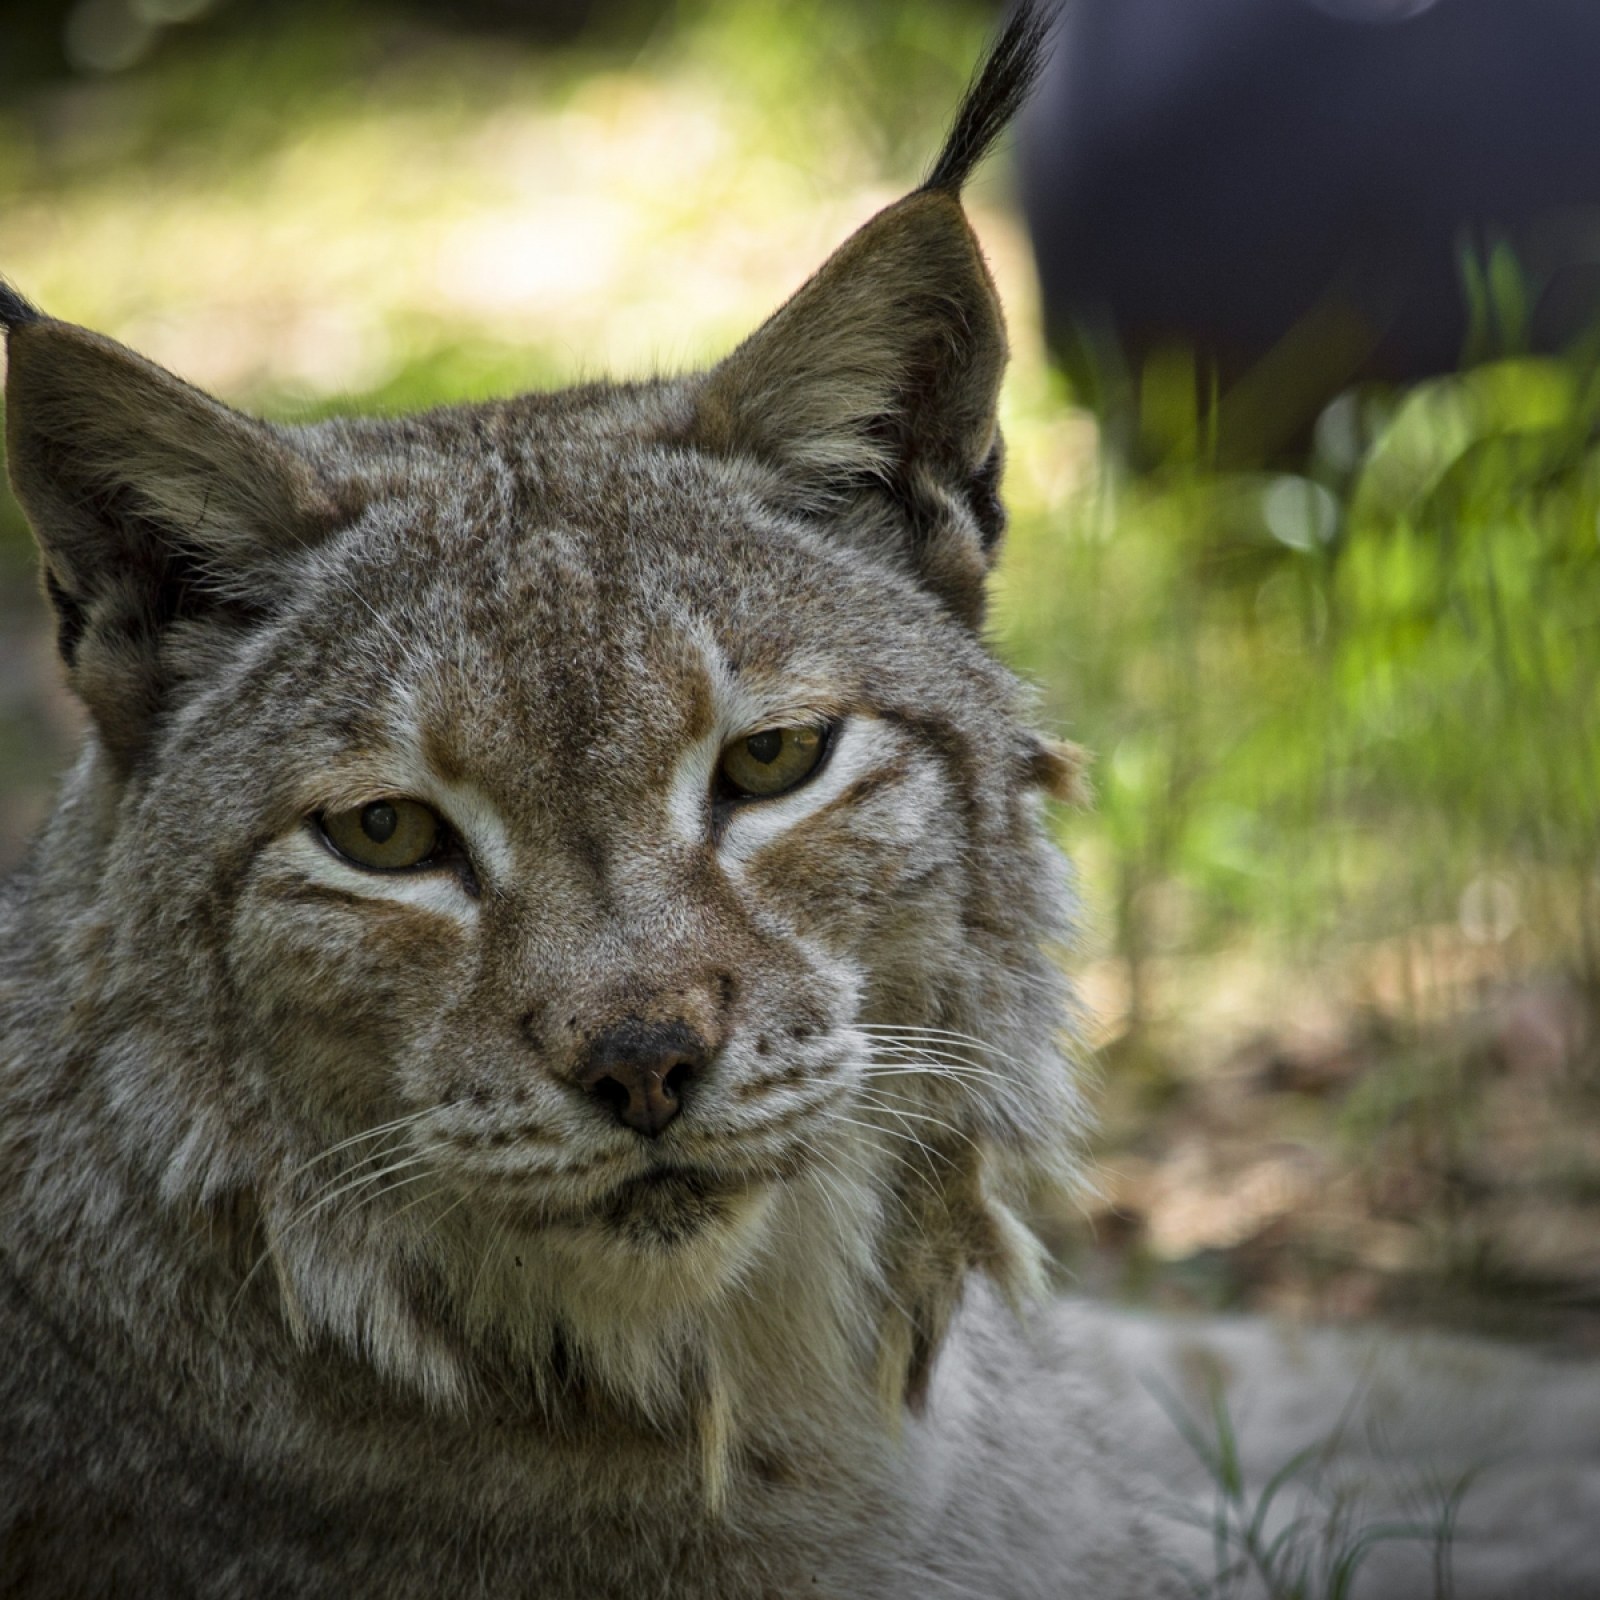 Lynx back in UK: 90% of public supports reintroduction of big cat to wild